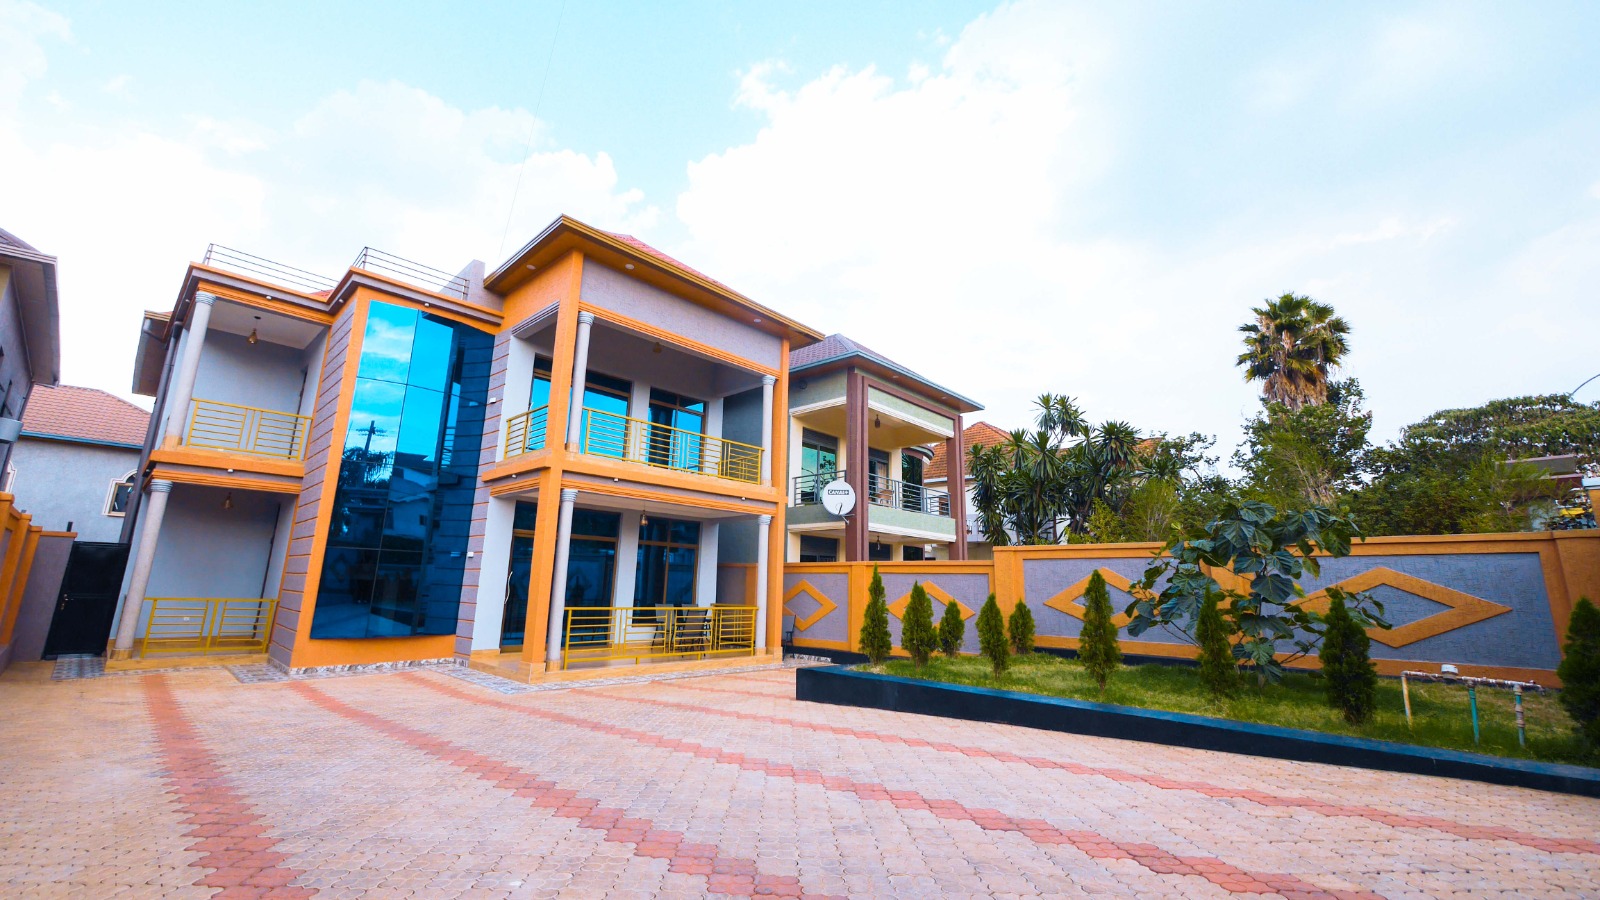 V171 Gacuriro very nice full furnished new house for rent with Big Parking in Kigali Rwanda